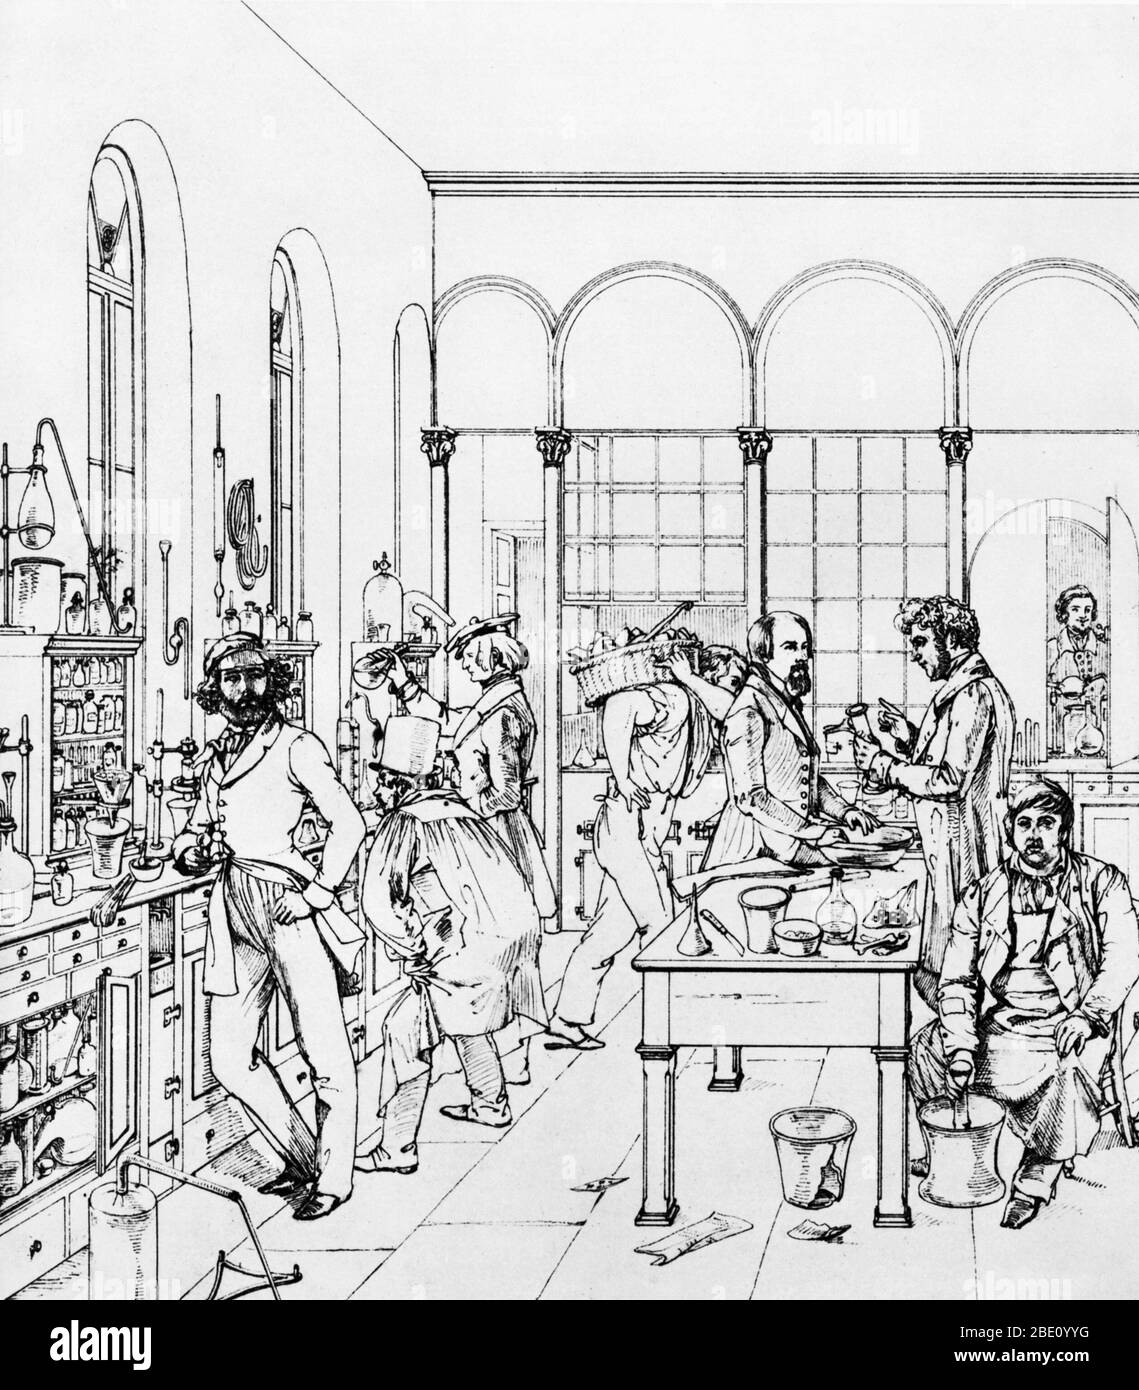 The main workroom in Justus von Liebig's laboratory in Giessen, Germany, 1842. Justus Freiherr von Liebig (May 12, 1803 - April 18, 1873) was a German chemist who made major contributions to agricultural and biological chemistry, and worked on the organization of organic chemistry. He devised the modern laboratory-oriented teaching method and is regarded as one of the greatest chemistry teachers of all time. He is known as the 'father of the fertilizer industry' for his discovery of nitrogen as an essential plant nutrient, and his formulation of the Law of the Minimum which described the effec Stock Photo